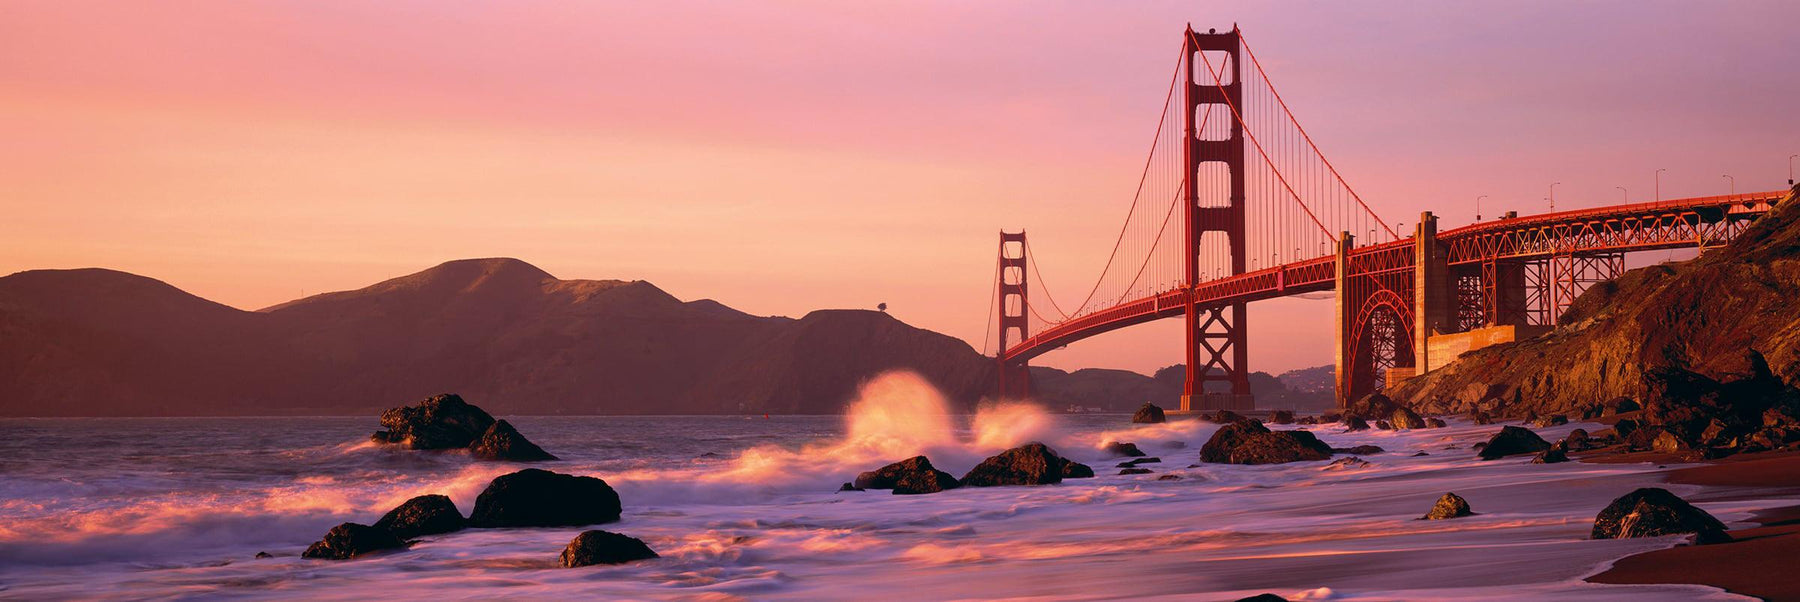 Waves crashing on the rocks of Baker Beach California with the Golden Gate Bridge in the background